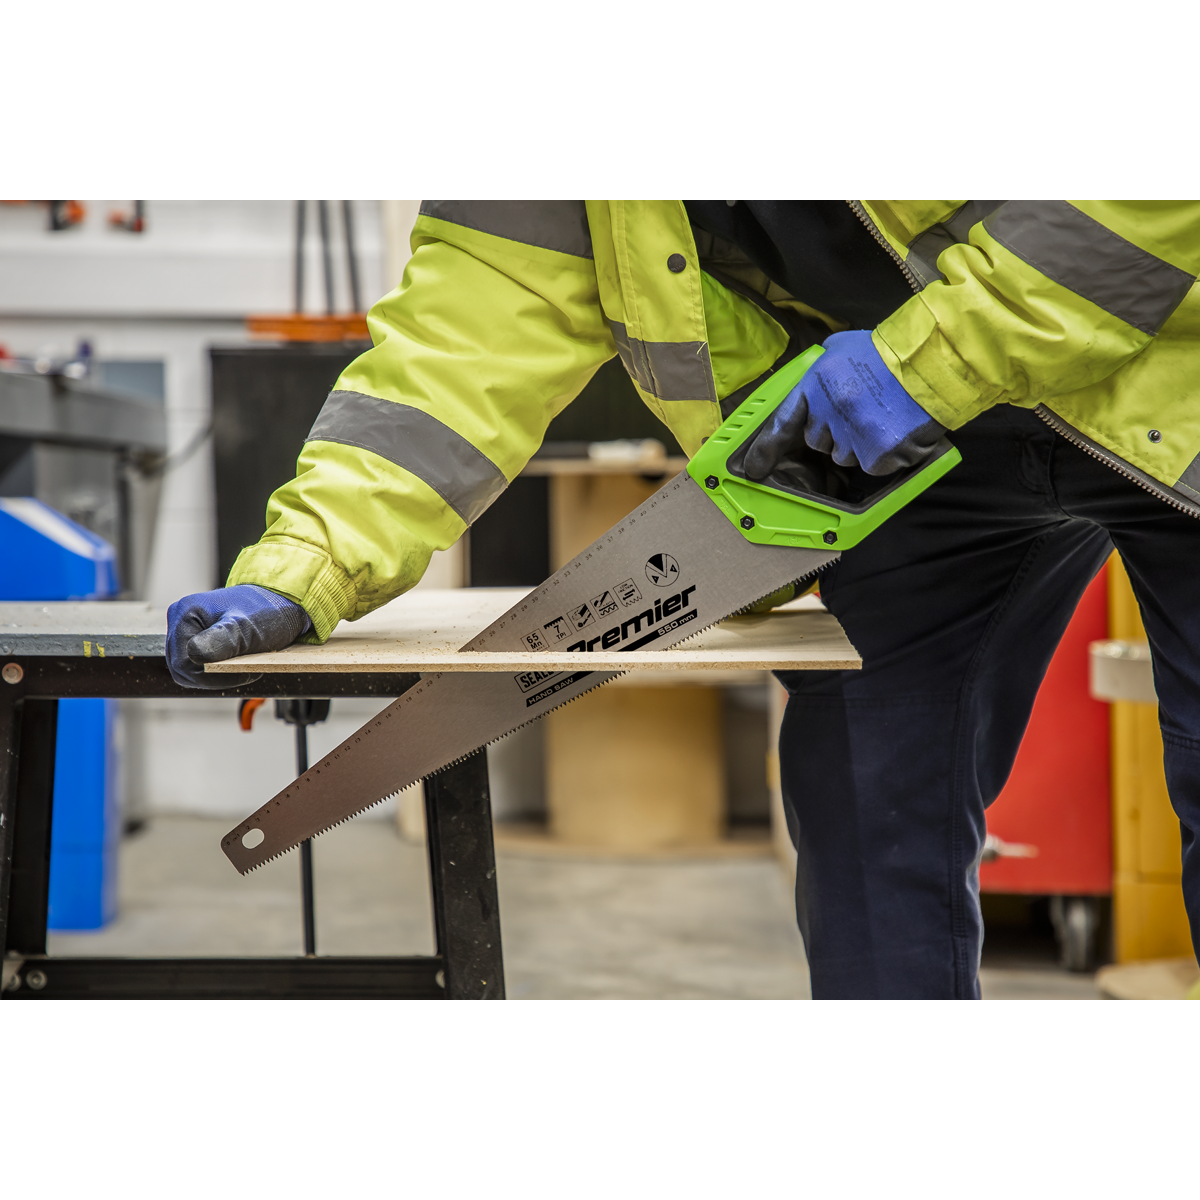 Sealy handsaw for cutting hardwood, MDF, chipboard and plastics